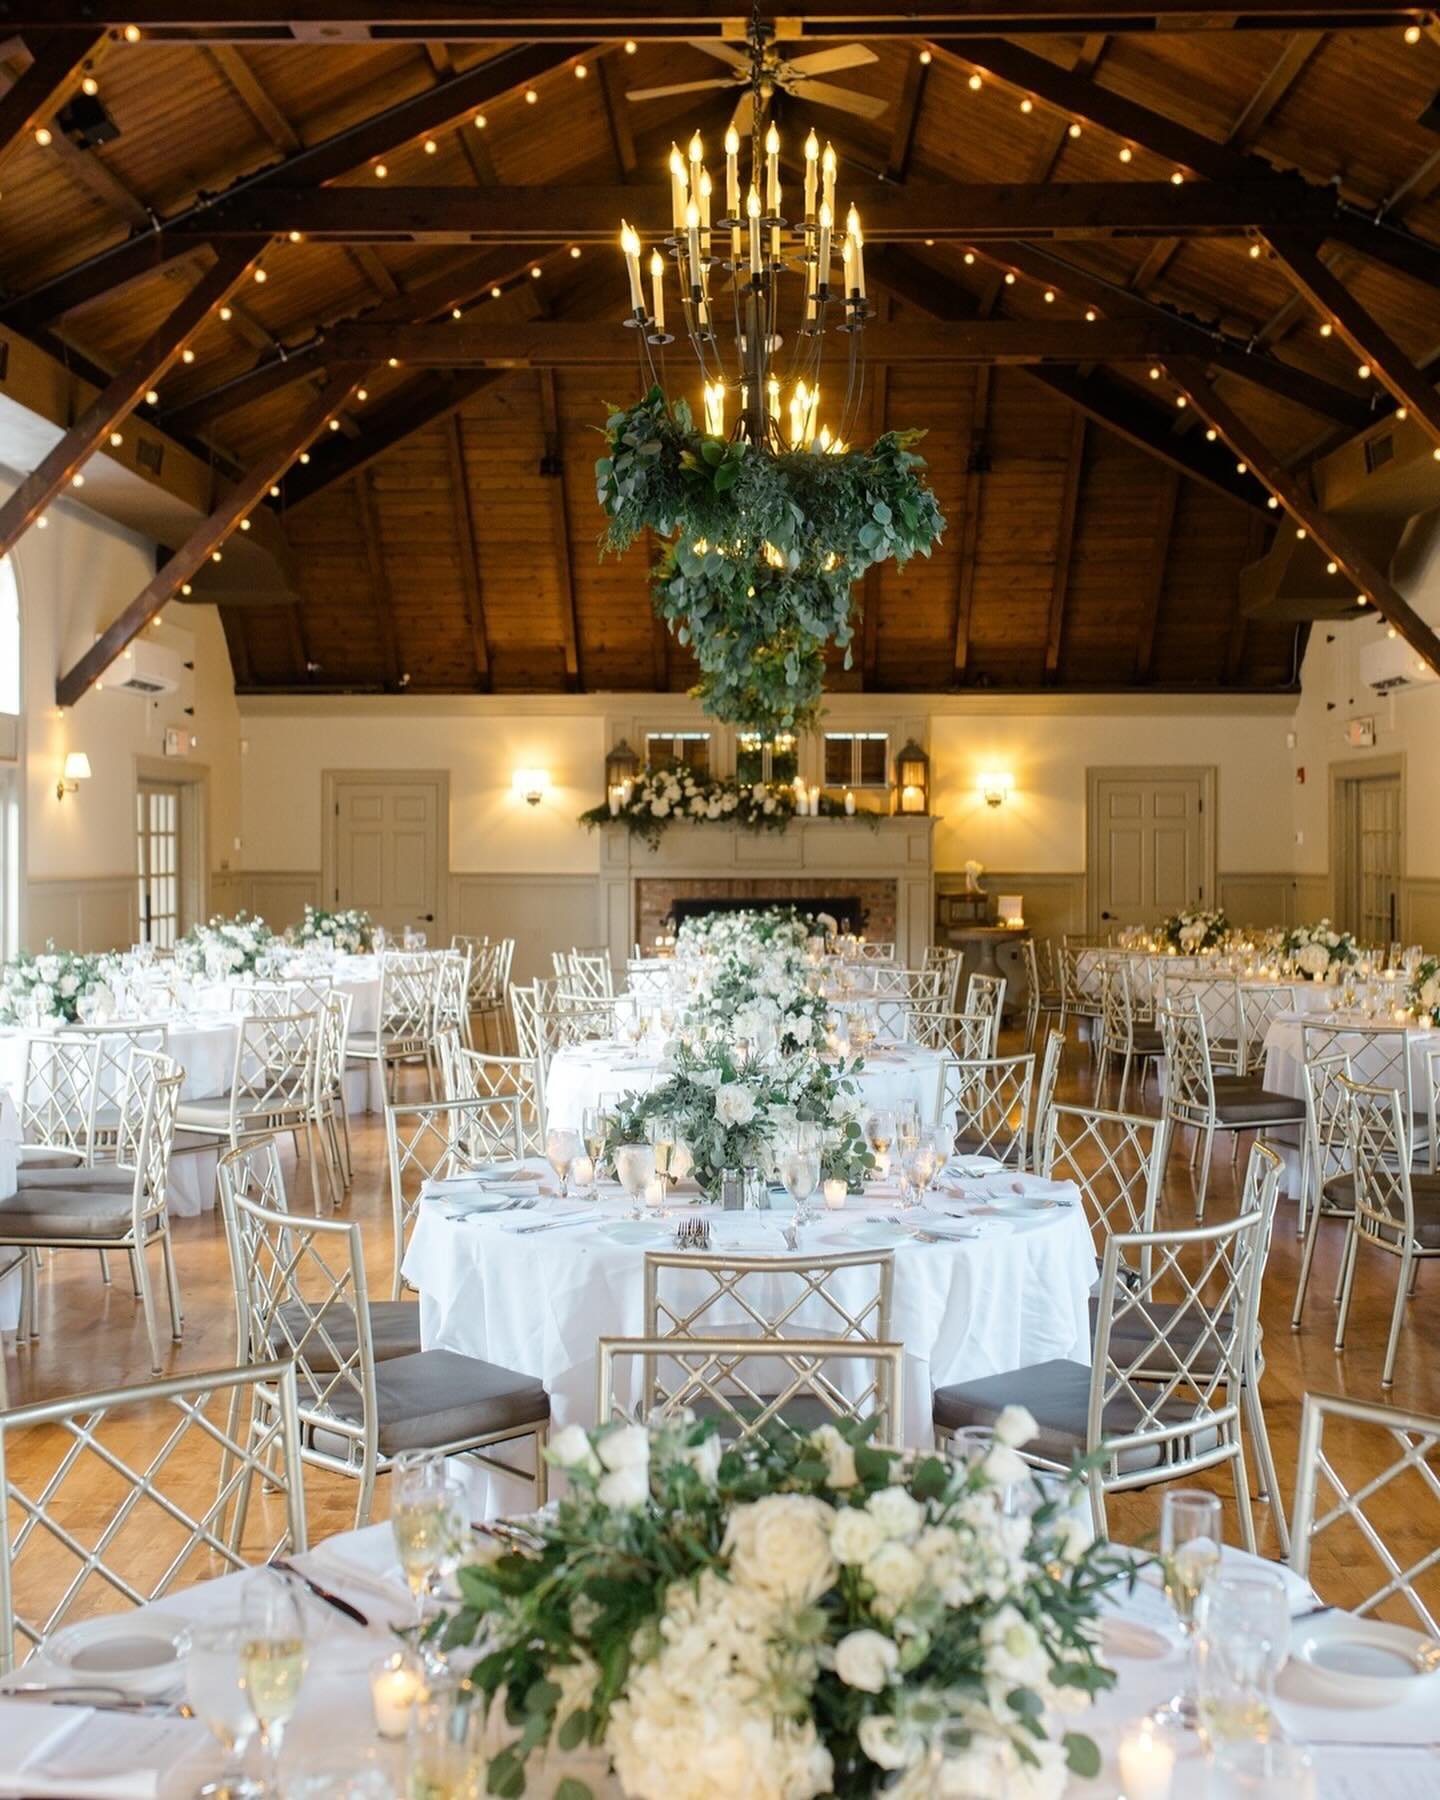 The floral arrangements for Krystina and Ken&rsquo;s wedding were stunning! The eye goes right to the beautiful centerpieces, the mantle behind the sweetheart table draped in flowers, and the chandeliers dangling with flowers and greenery. Truly brea